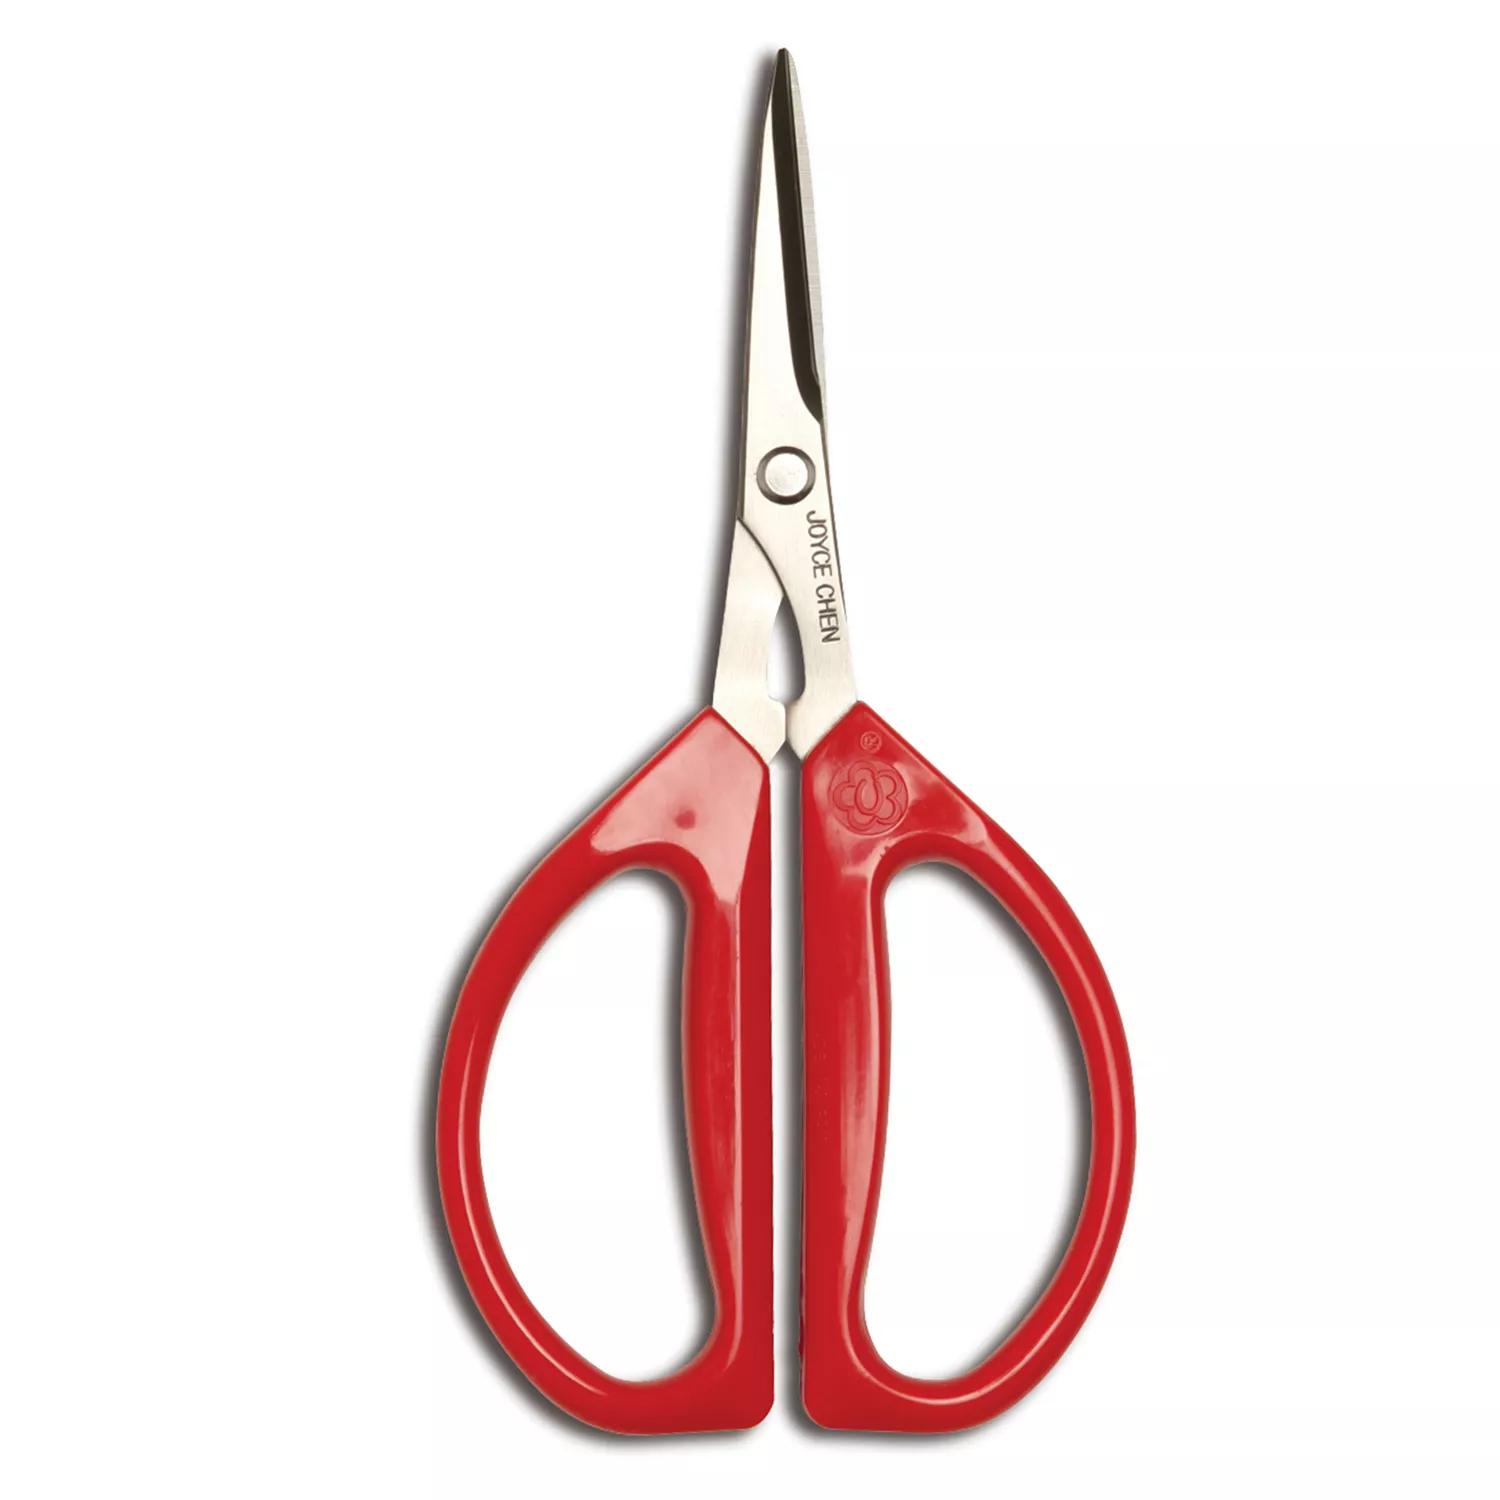 Original 'Unlimited' Scissors by Joyce Chen Are Arguably the Best Kitchen  Shears - Eater